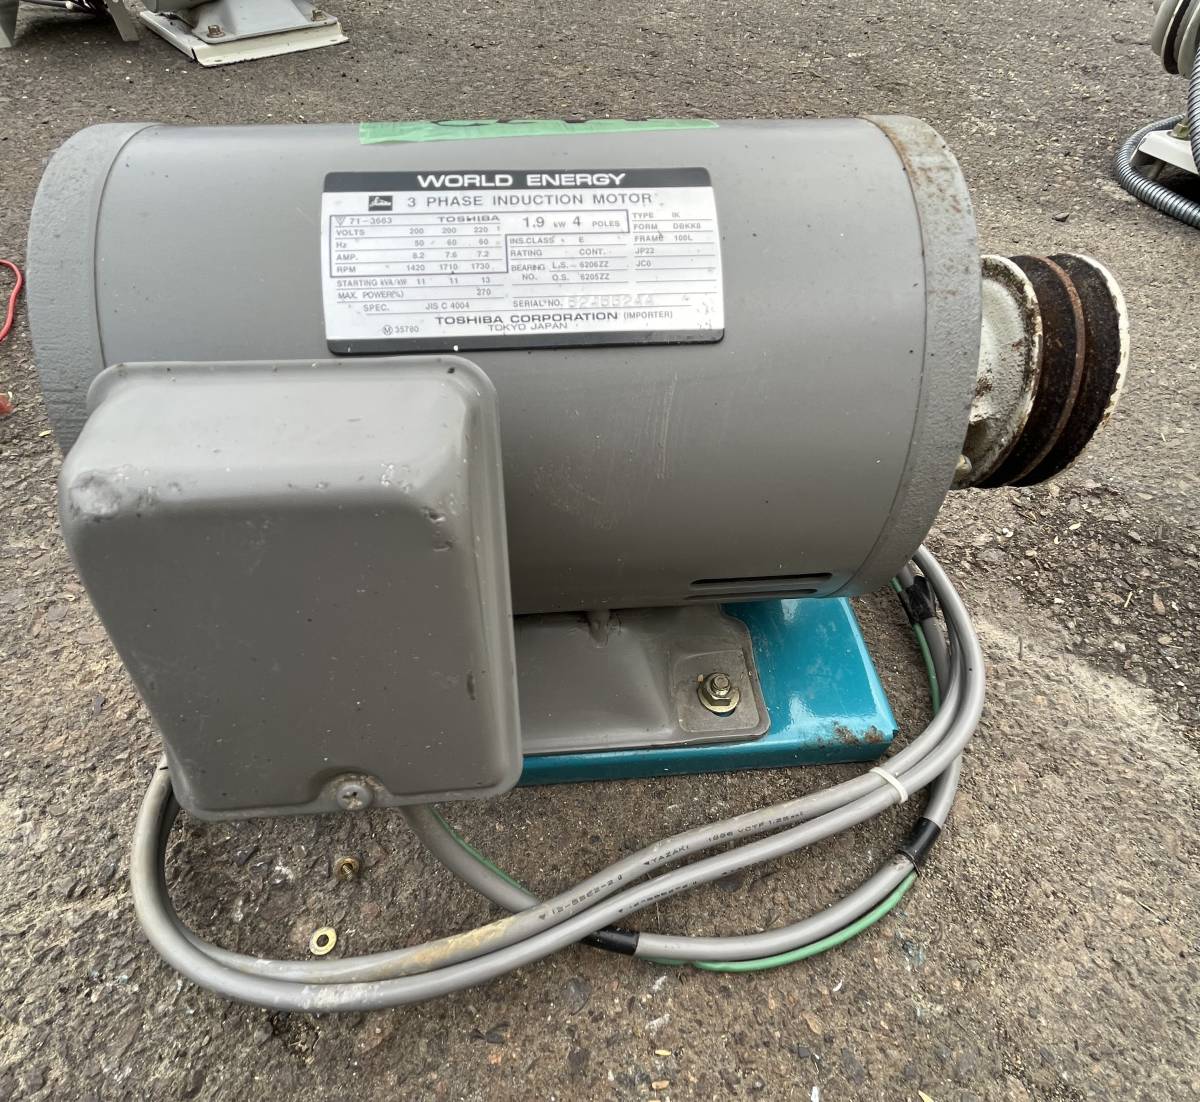 【SEAL限定商品】 NO.50-1433（新潟）東芝 モーター3PHASE INDUCTION MOTOR 1.9kW 4POLES その他